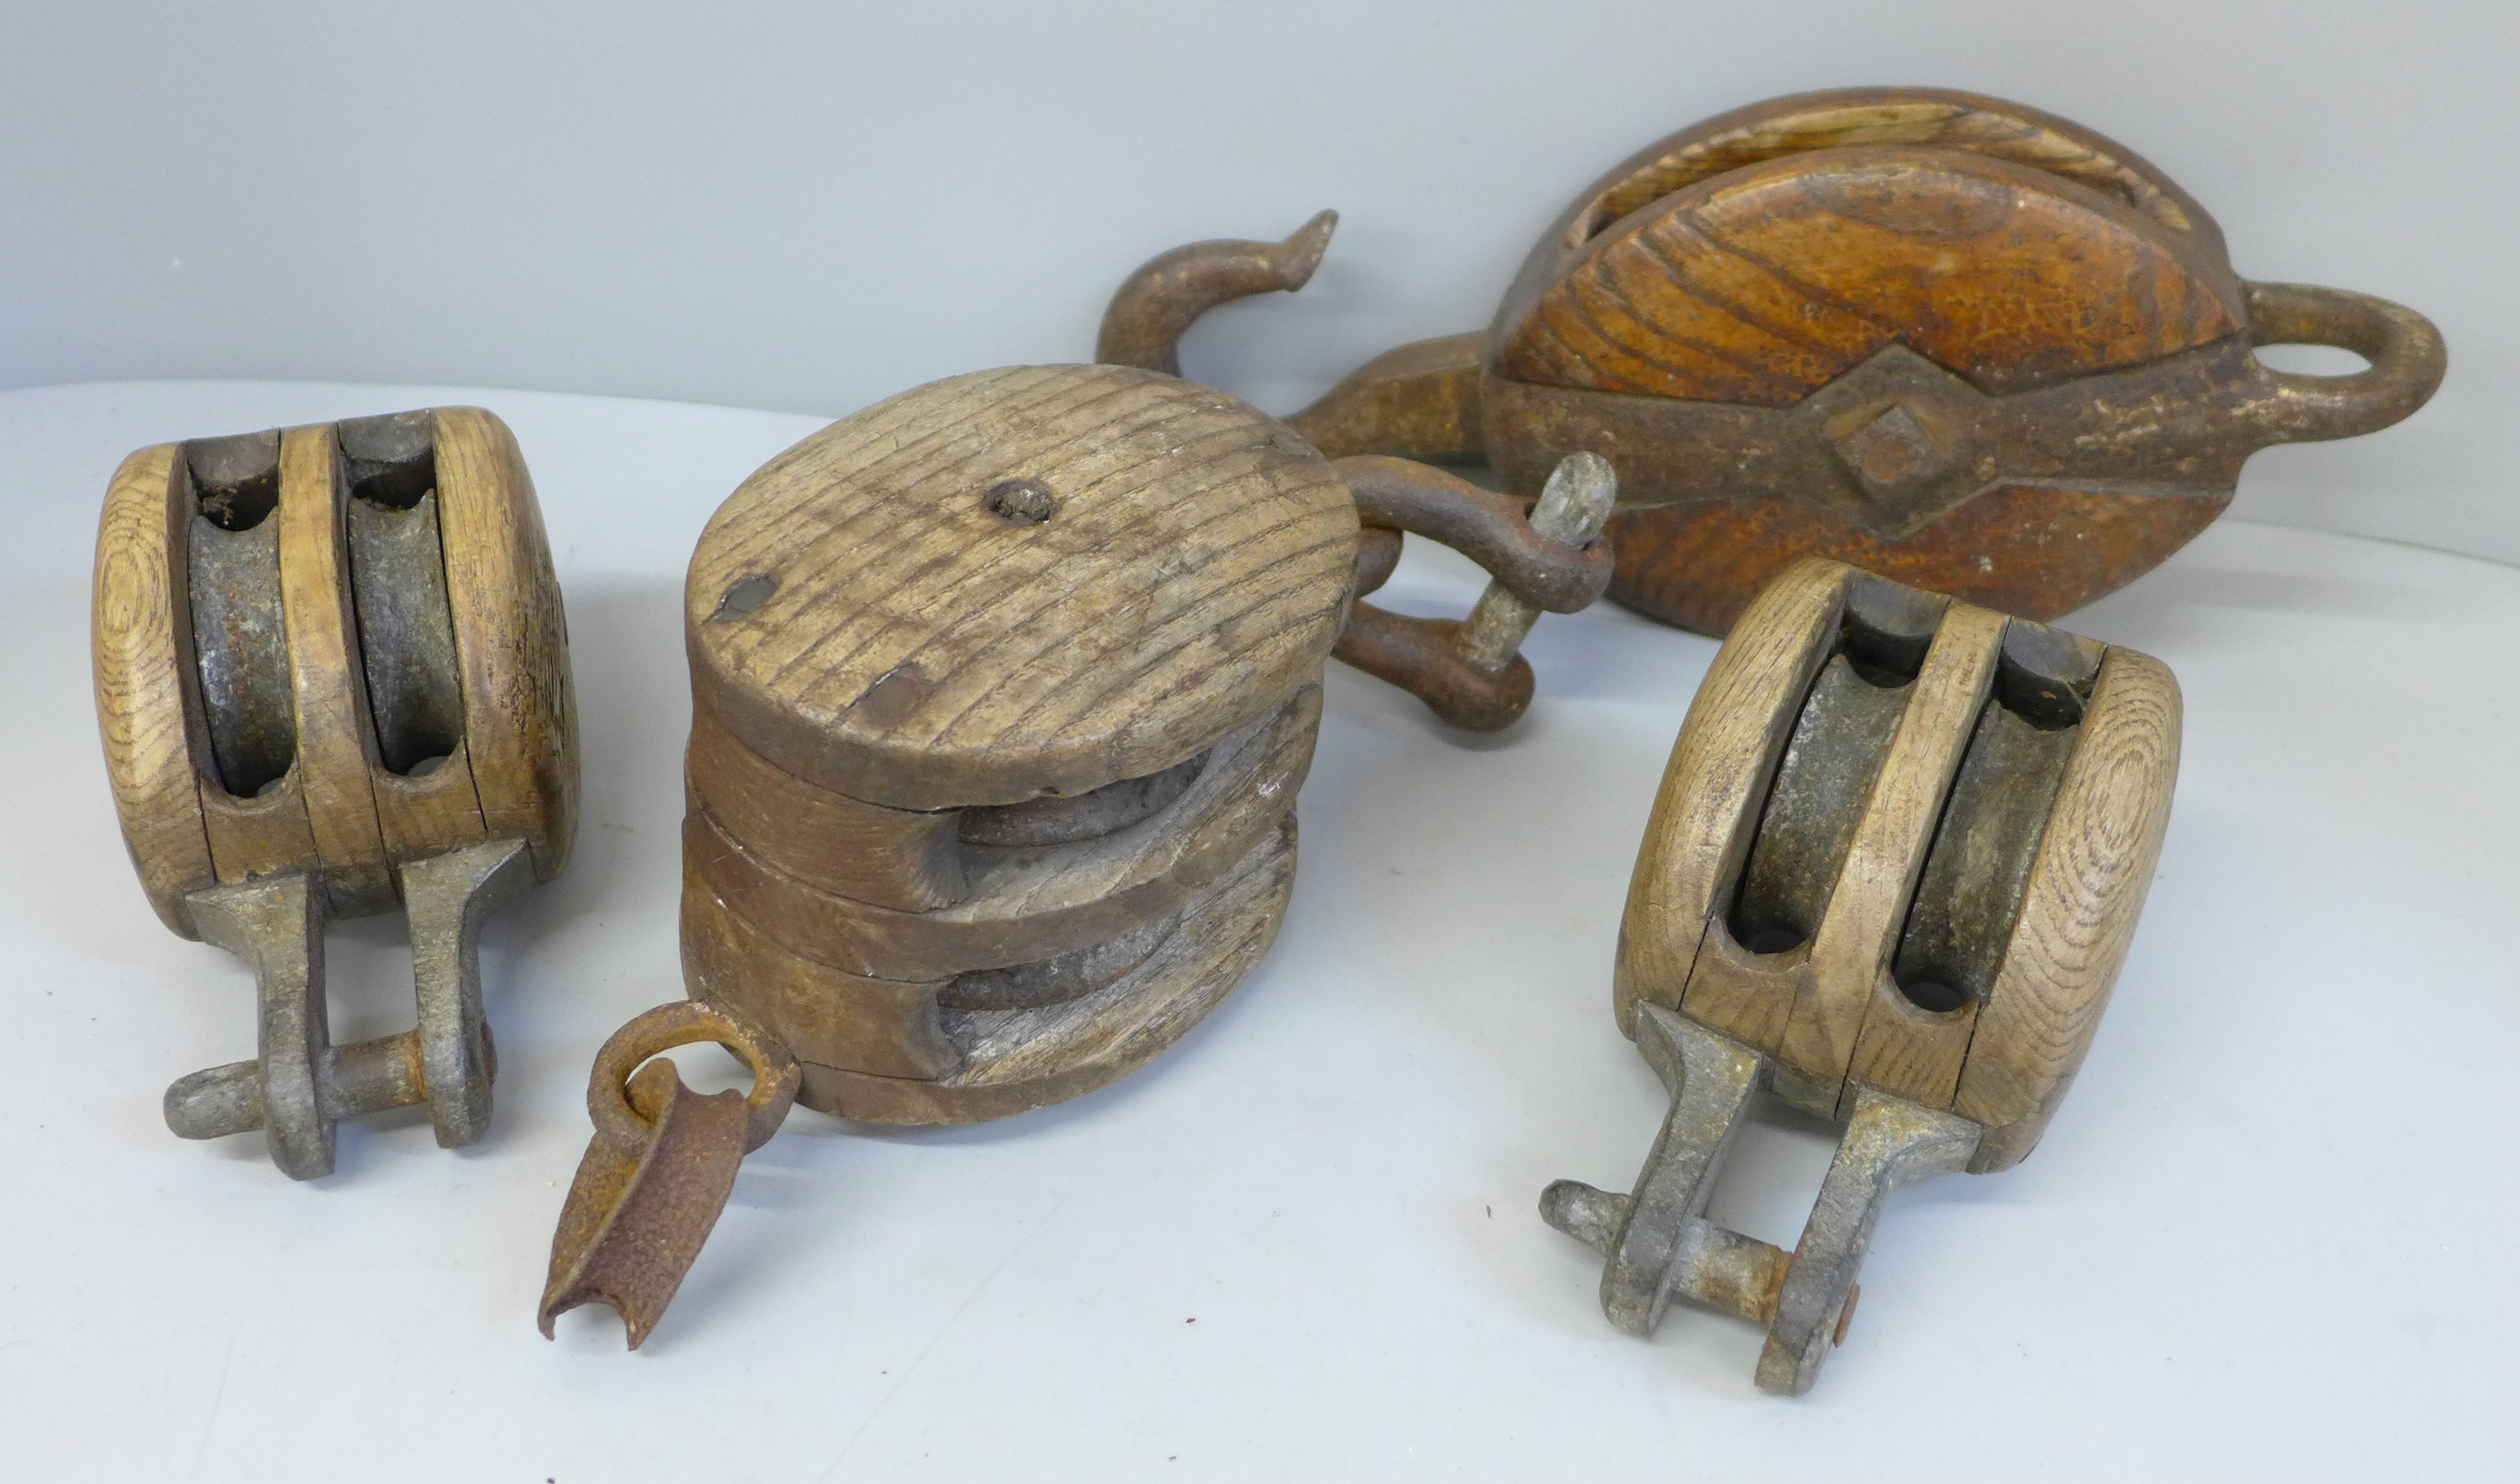 Four pulley wheels including a pair